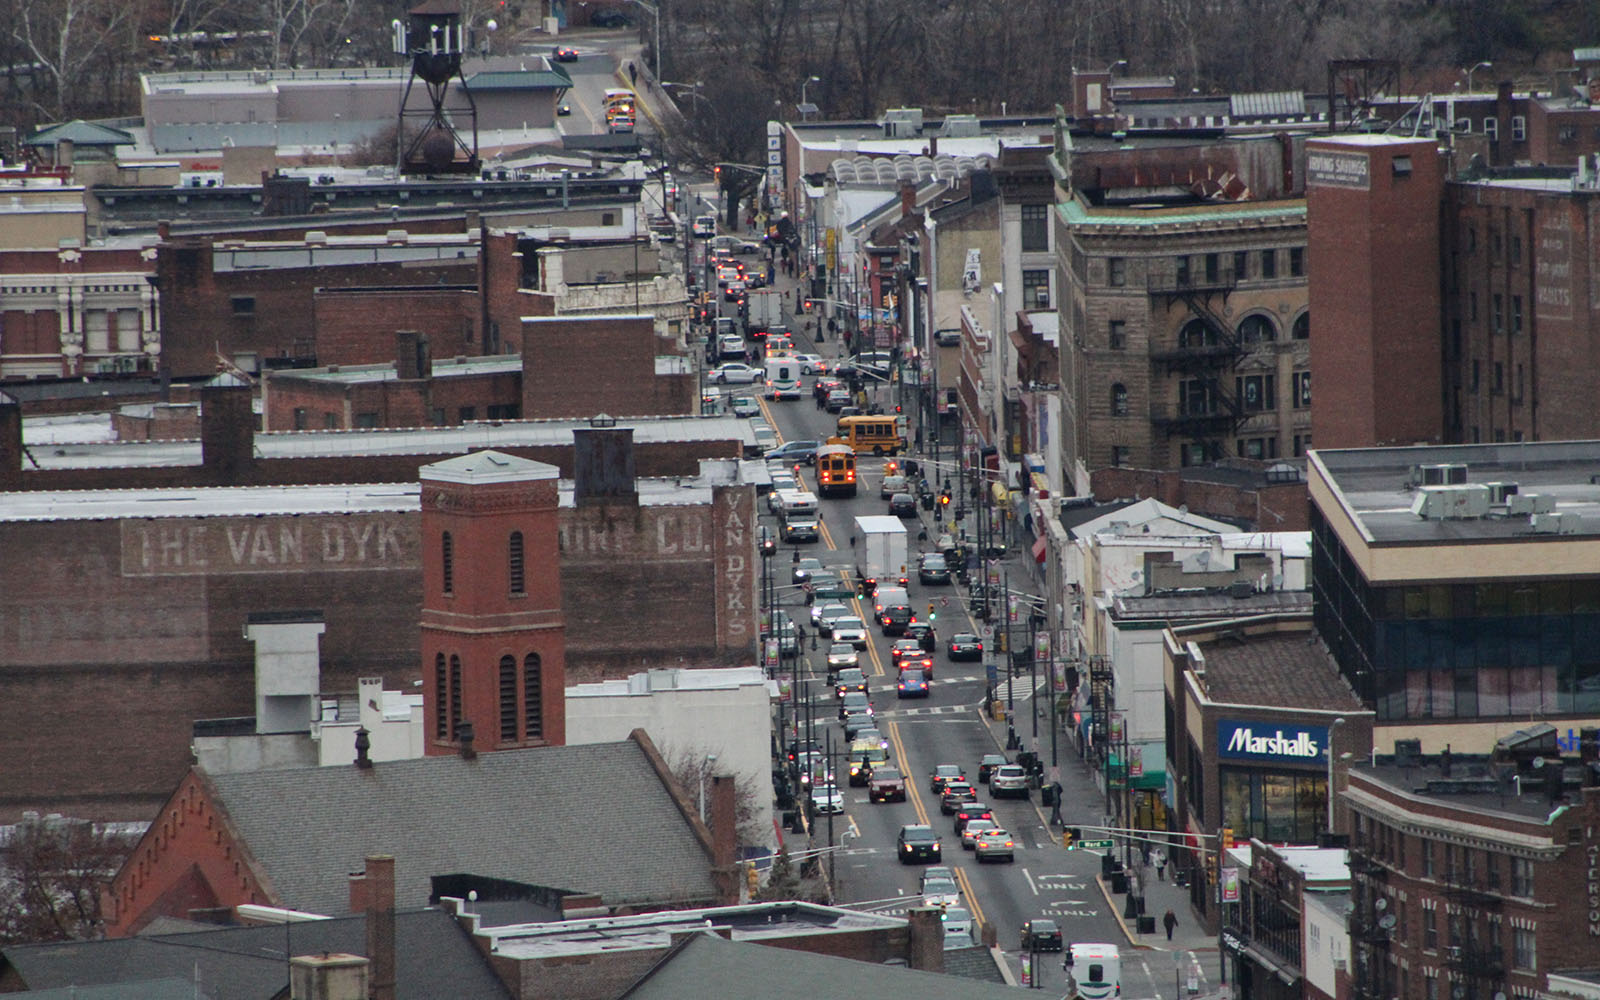 Photo from above looking down onto a street in downtown Paterson, New Jersey